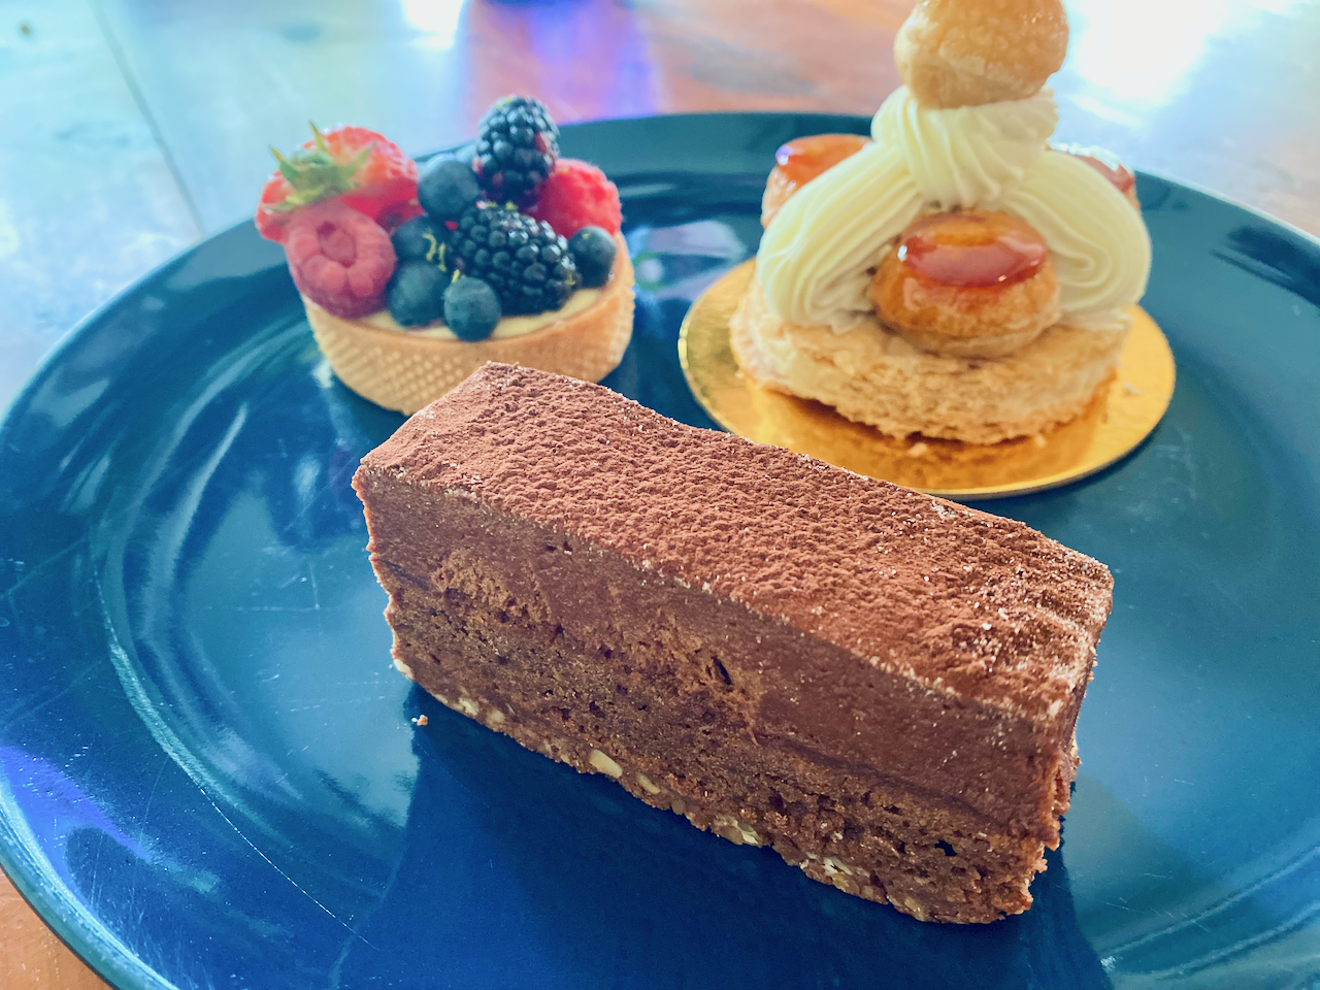 French-trained pastry chef Yi Ting has developed a divine menu of sweets at Brian's coffee.